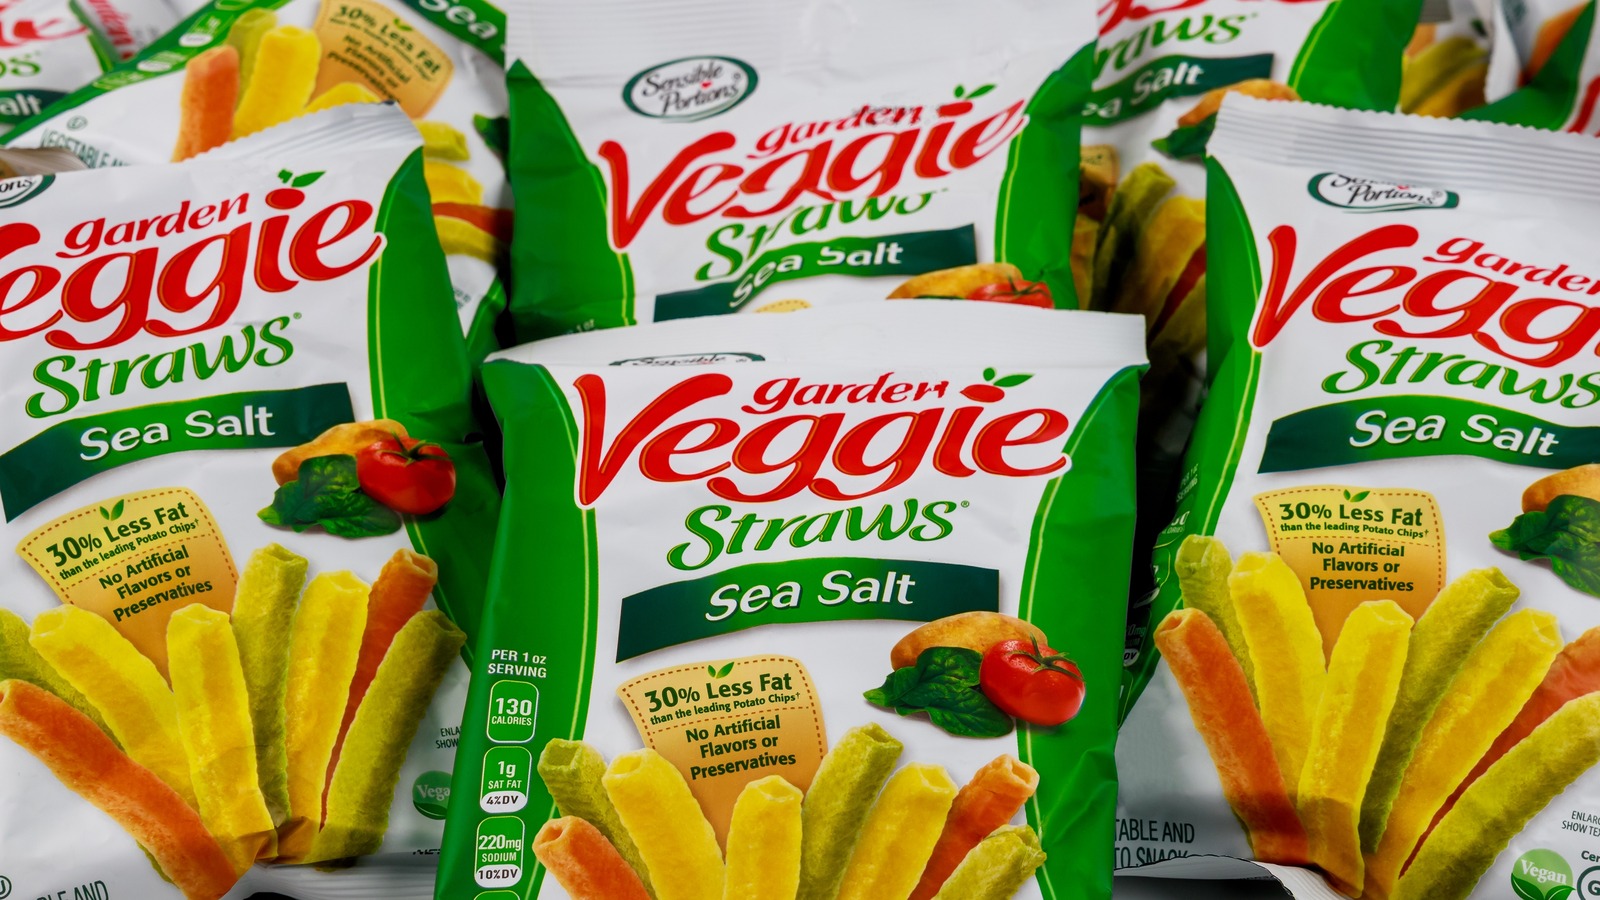 Why You Should Think Twice Before Eating Garden Veggie Straws